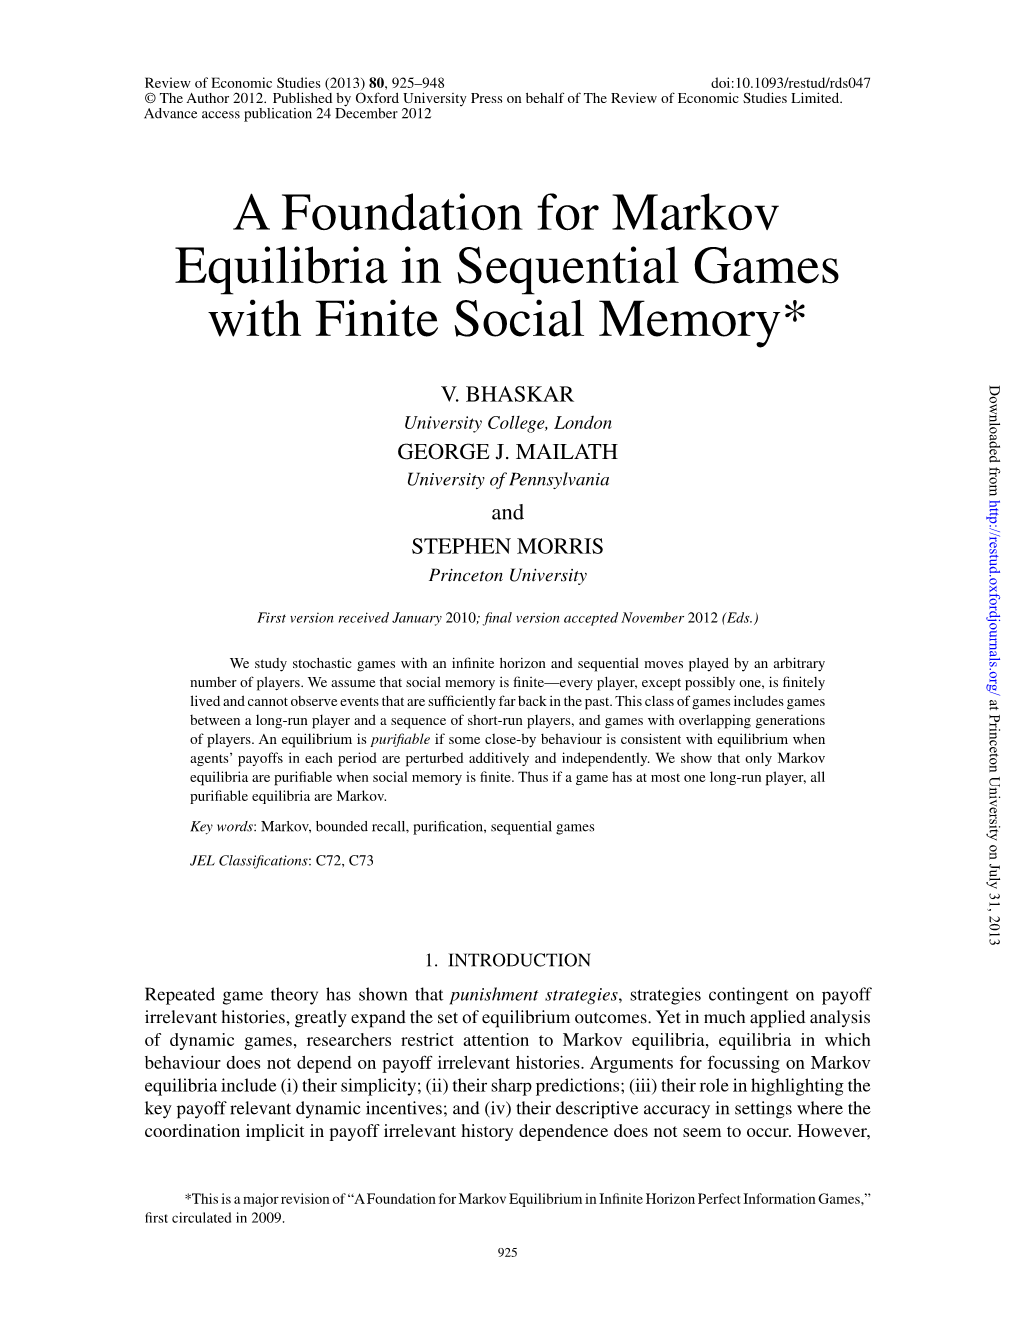 A Foundation for Markov Equilibria in Sequential Games with Finite Social Memory*